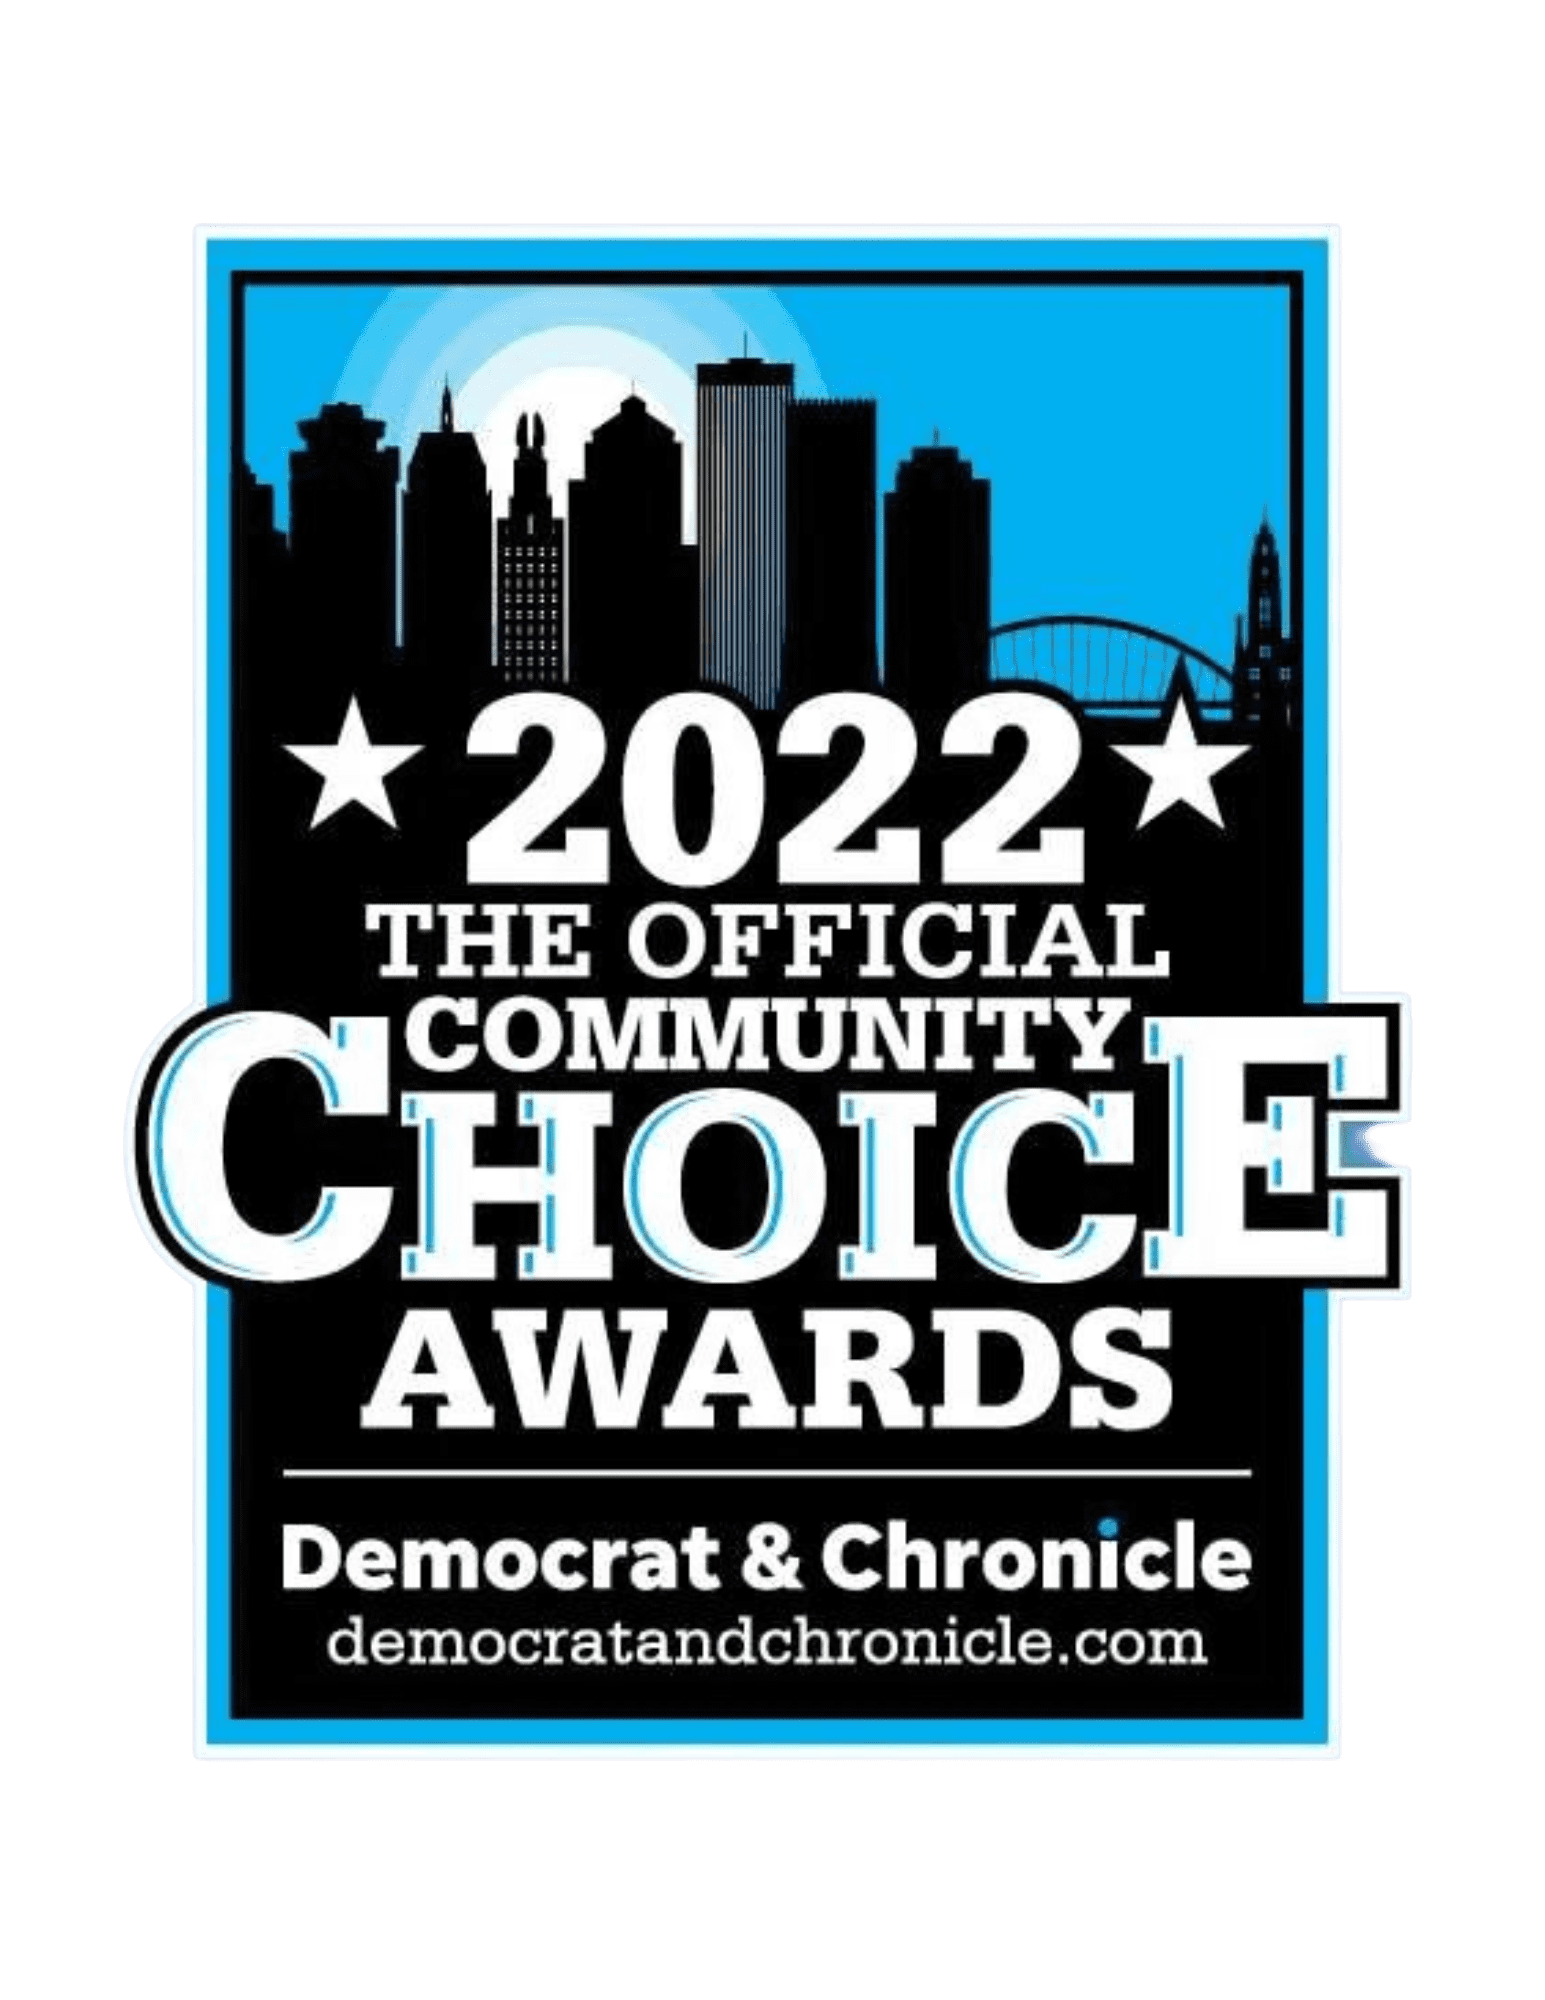 Rochester's Official Community Choice Awards First Place 2022